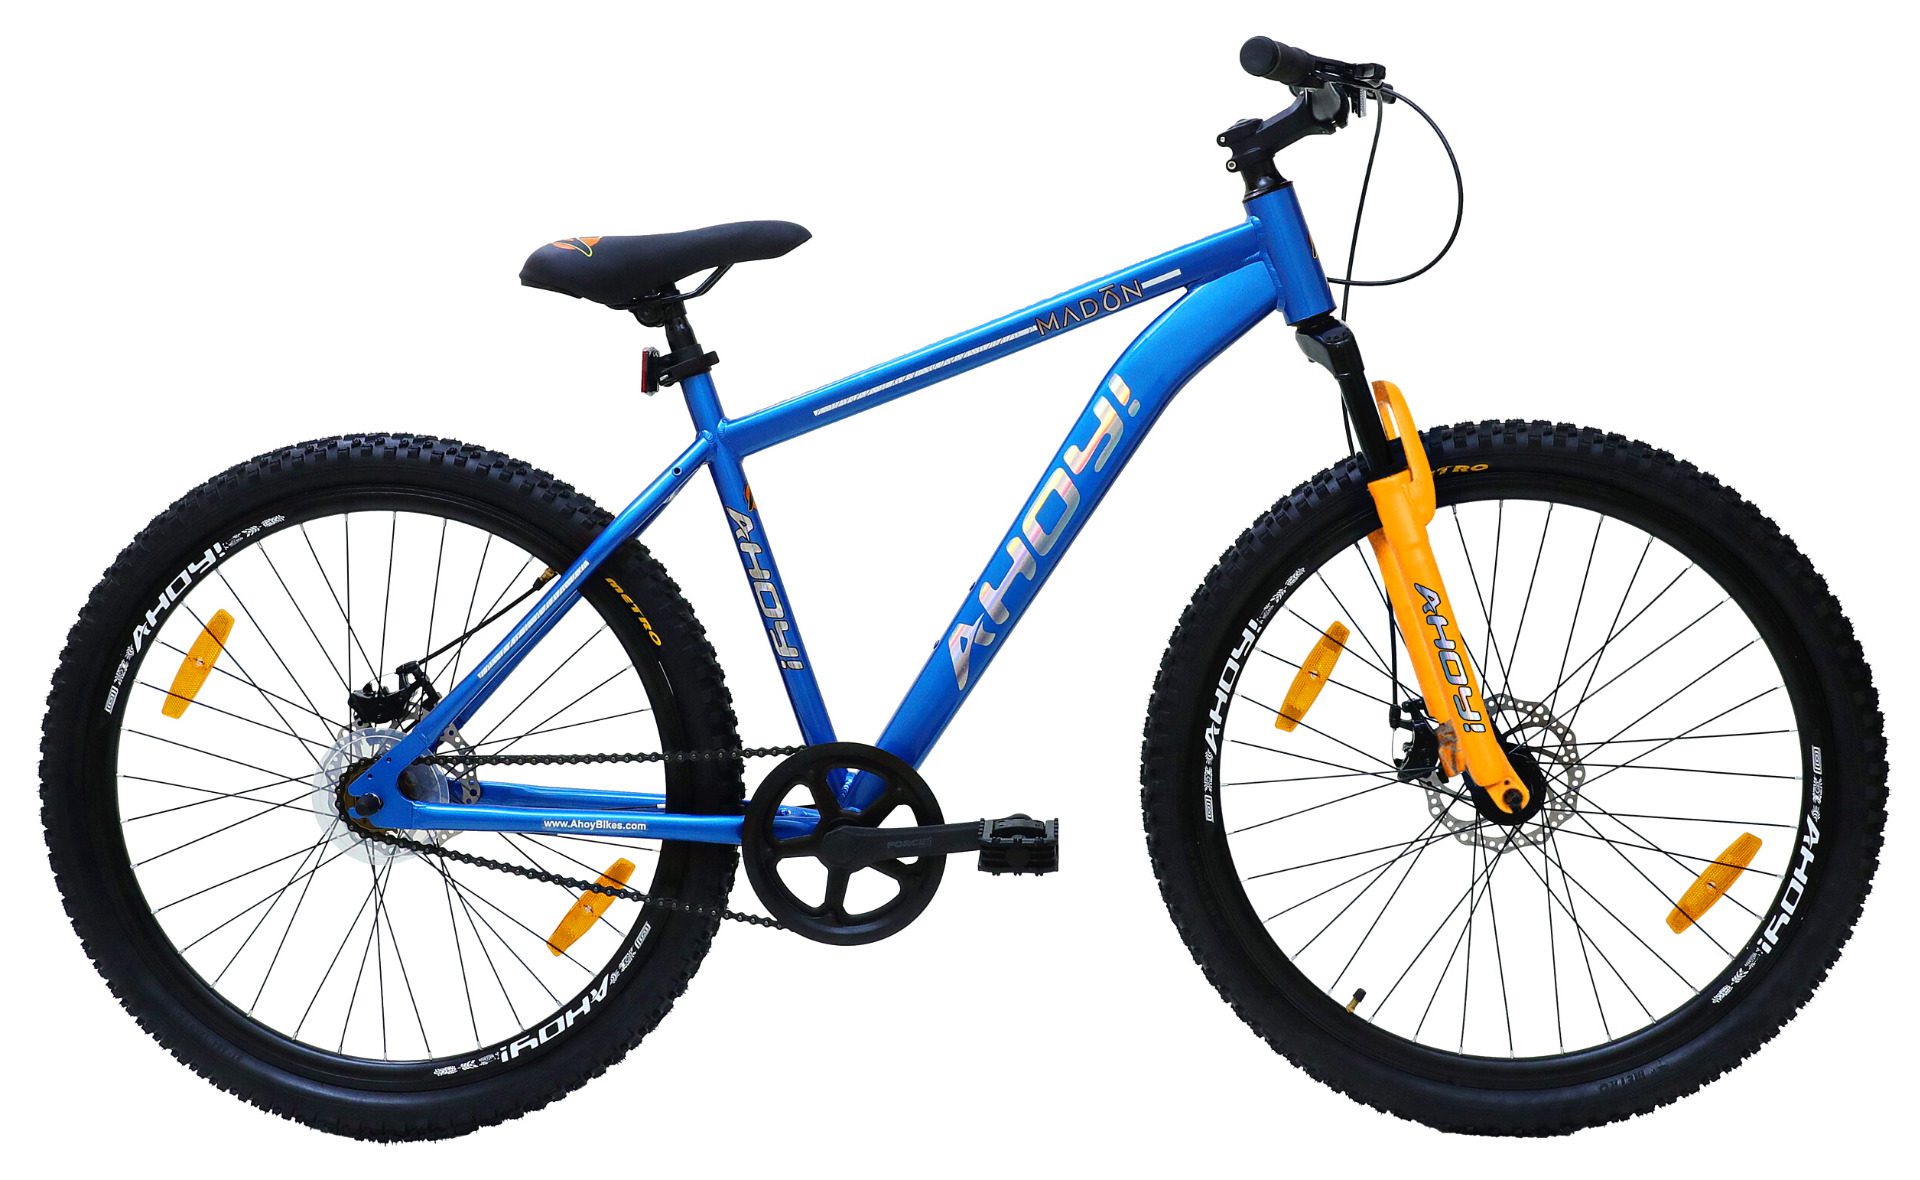 Madon Cycle Without Gear 27.5T | Buy blue non gear cycle for men